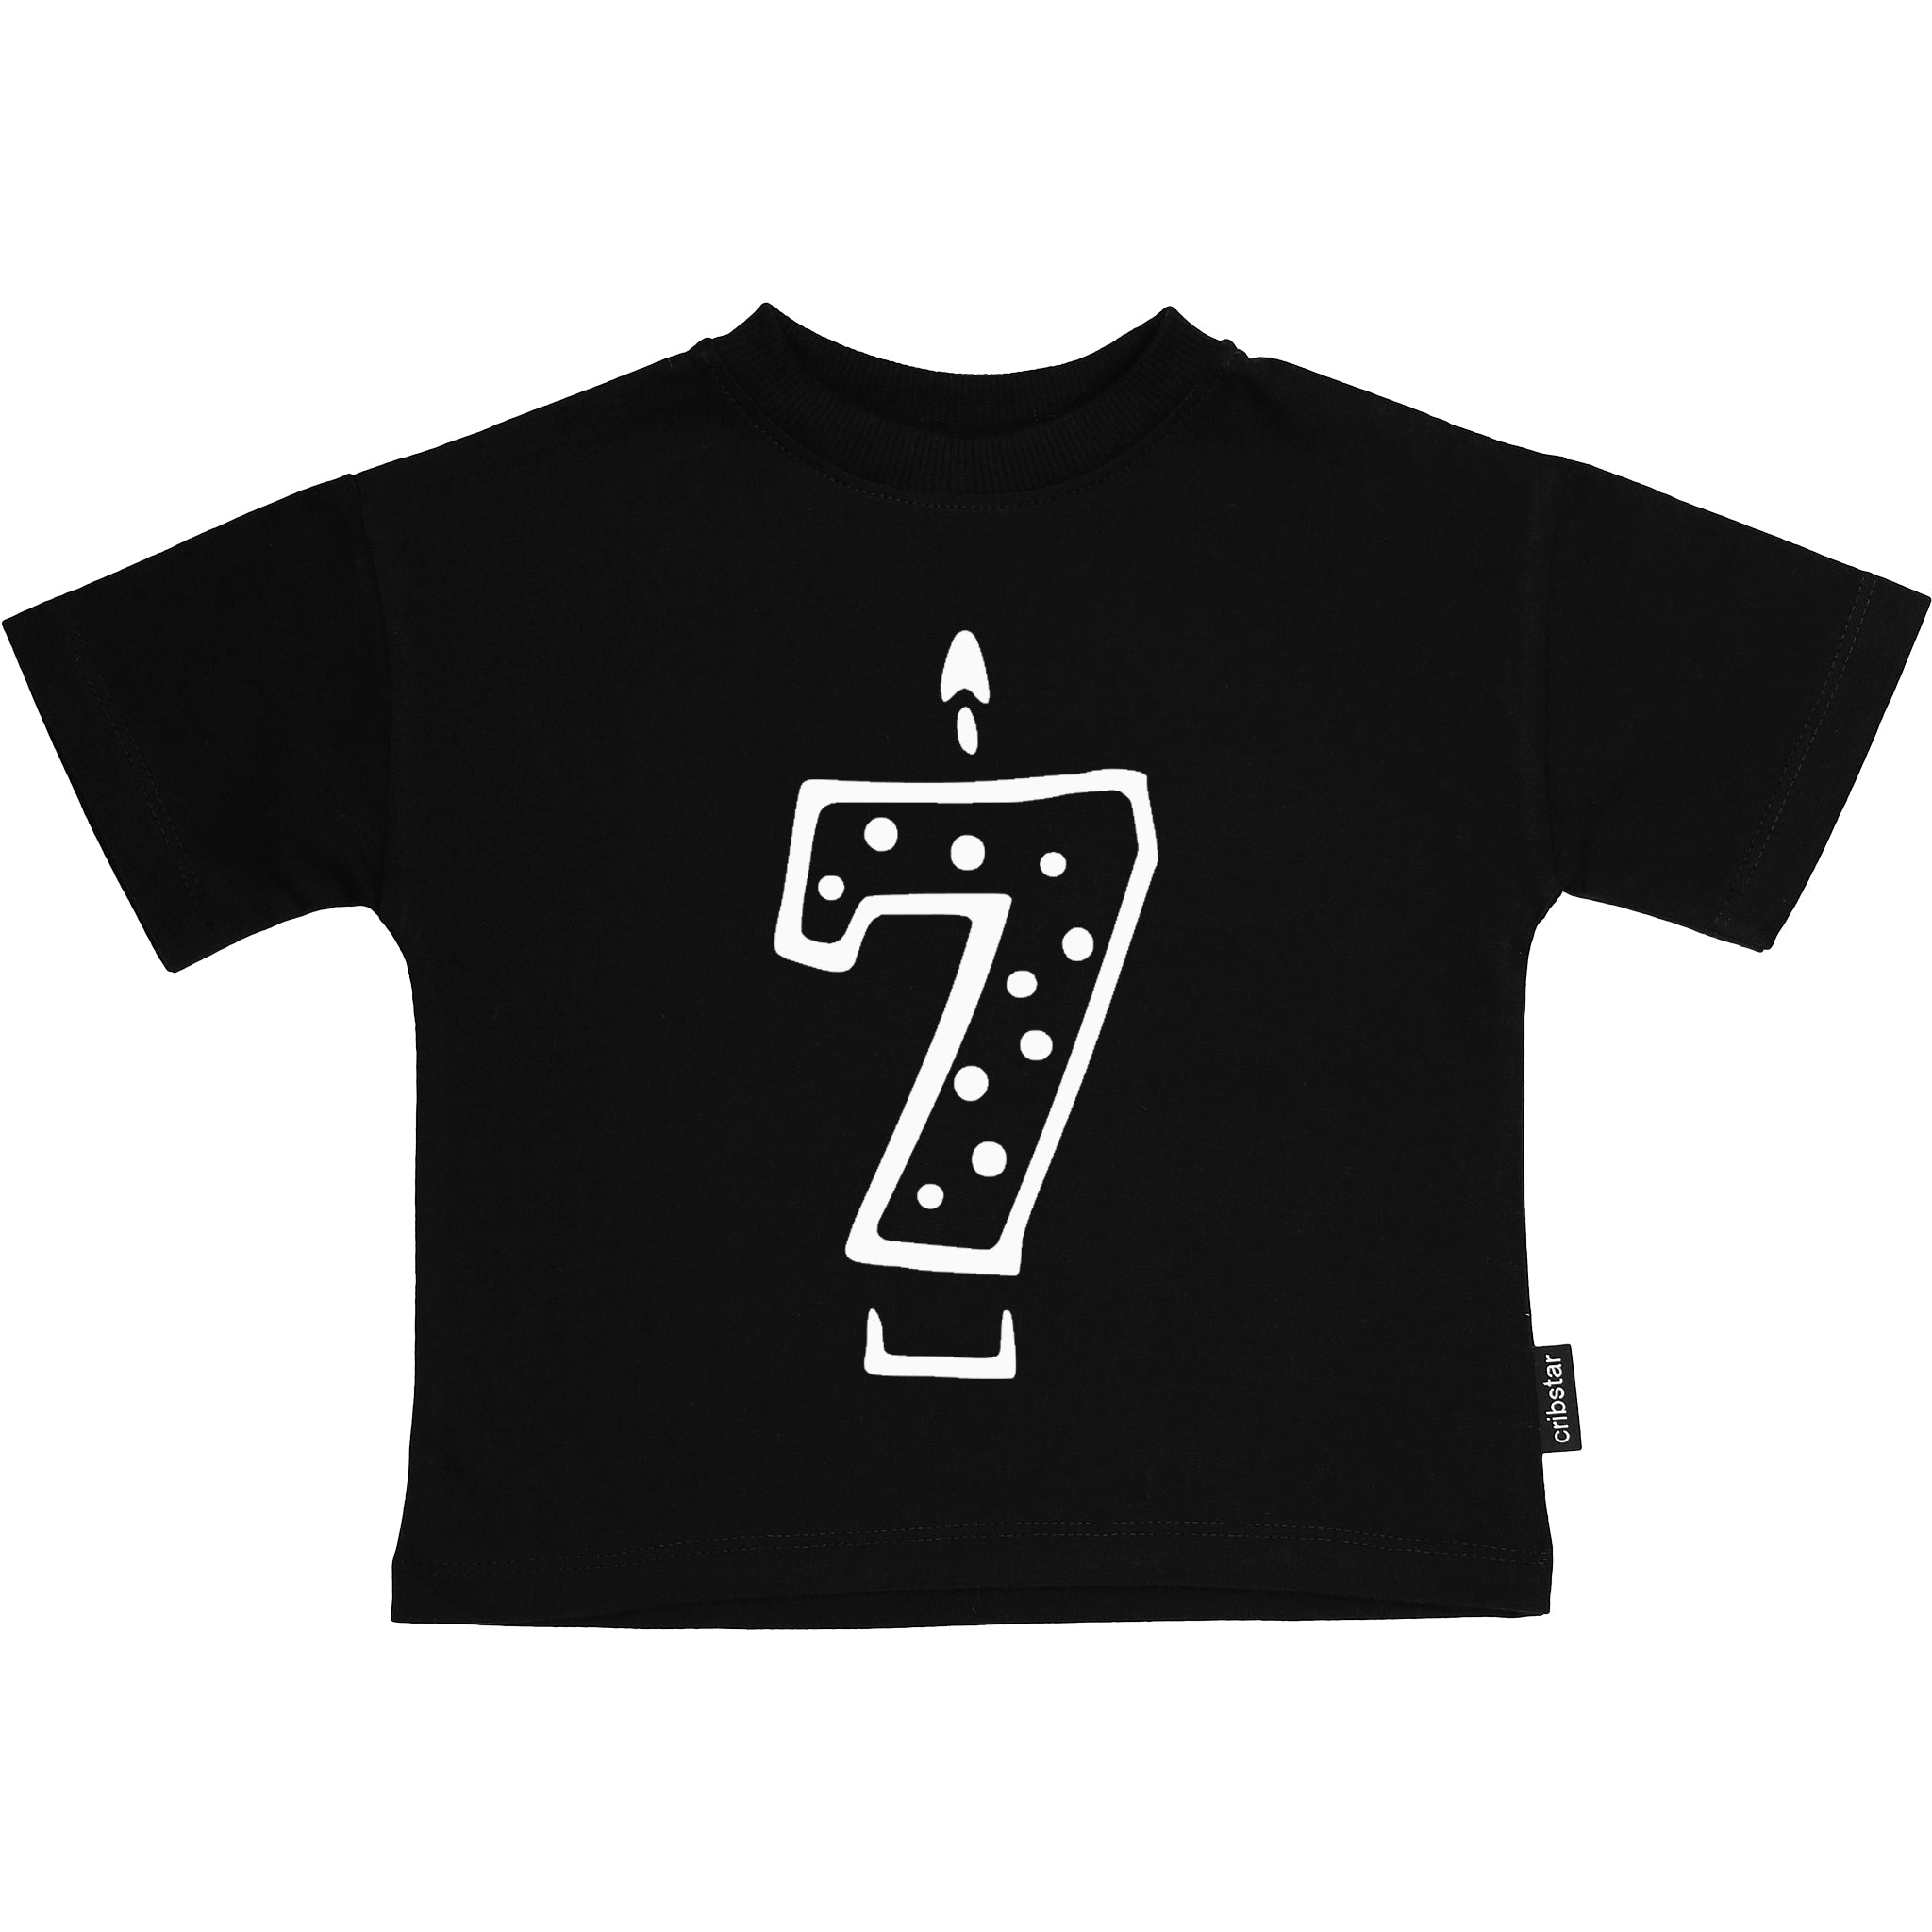 7 Candle T-shirt - White